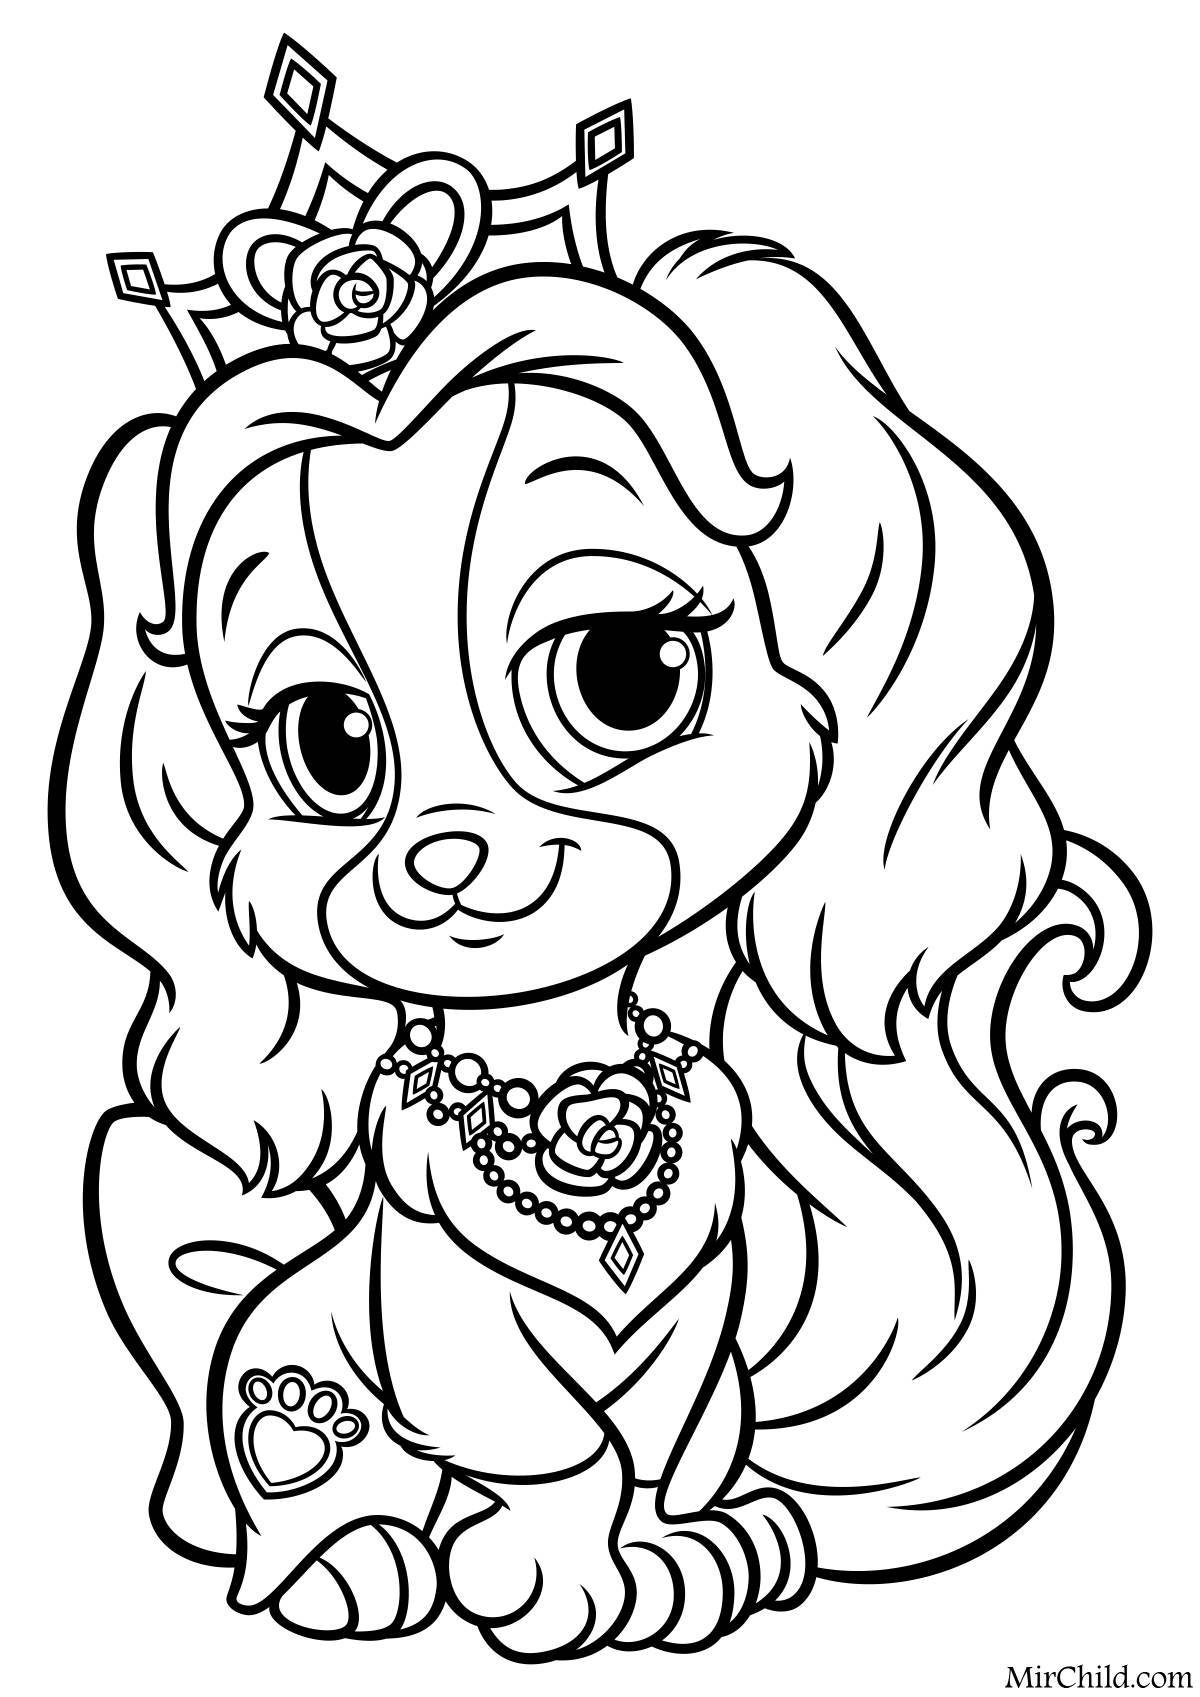 Fairytale coloring for girls 7 years old